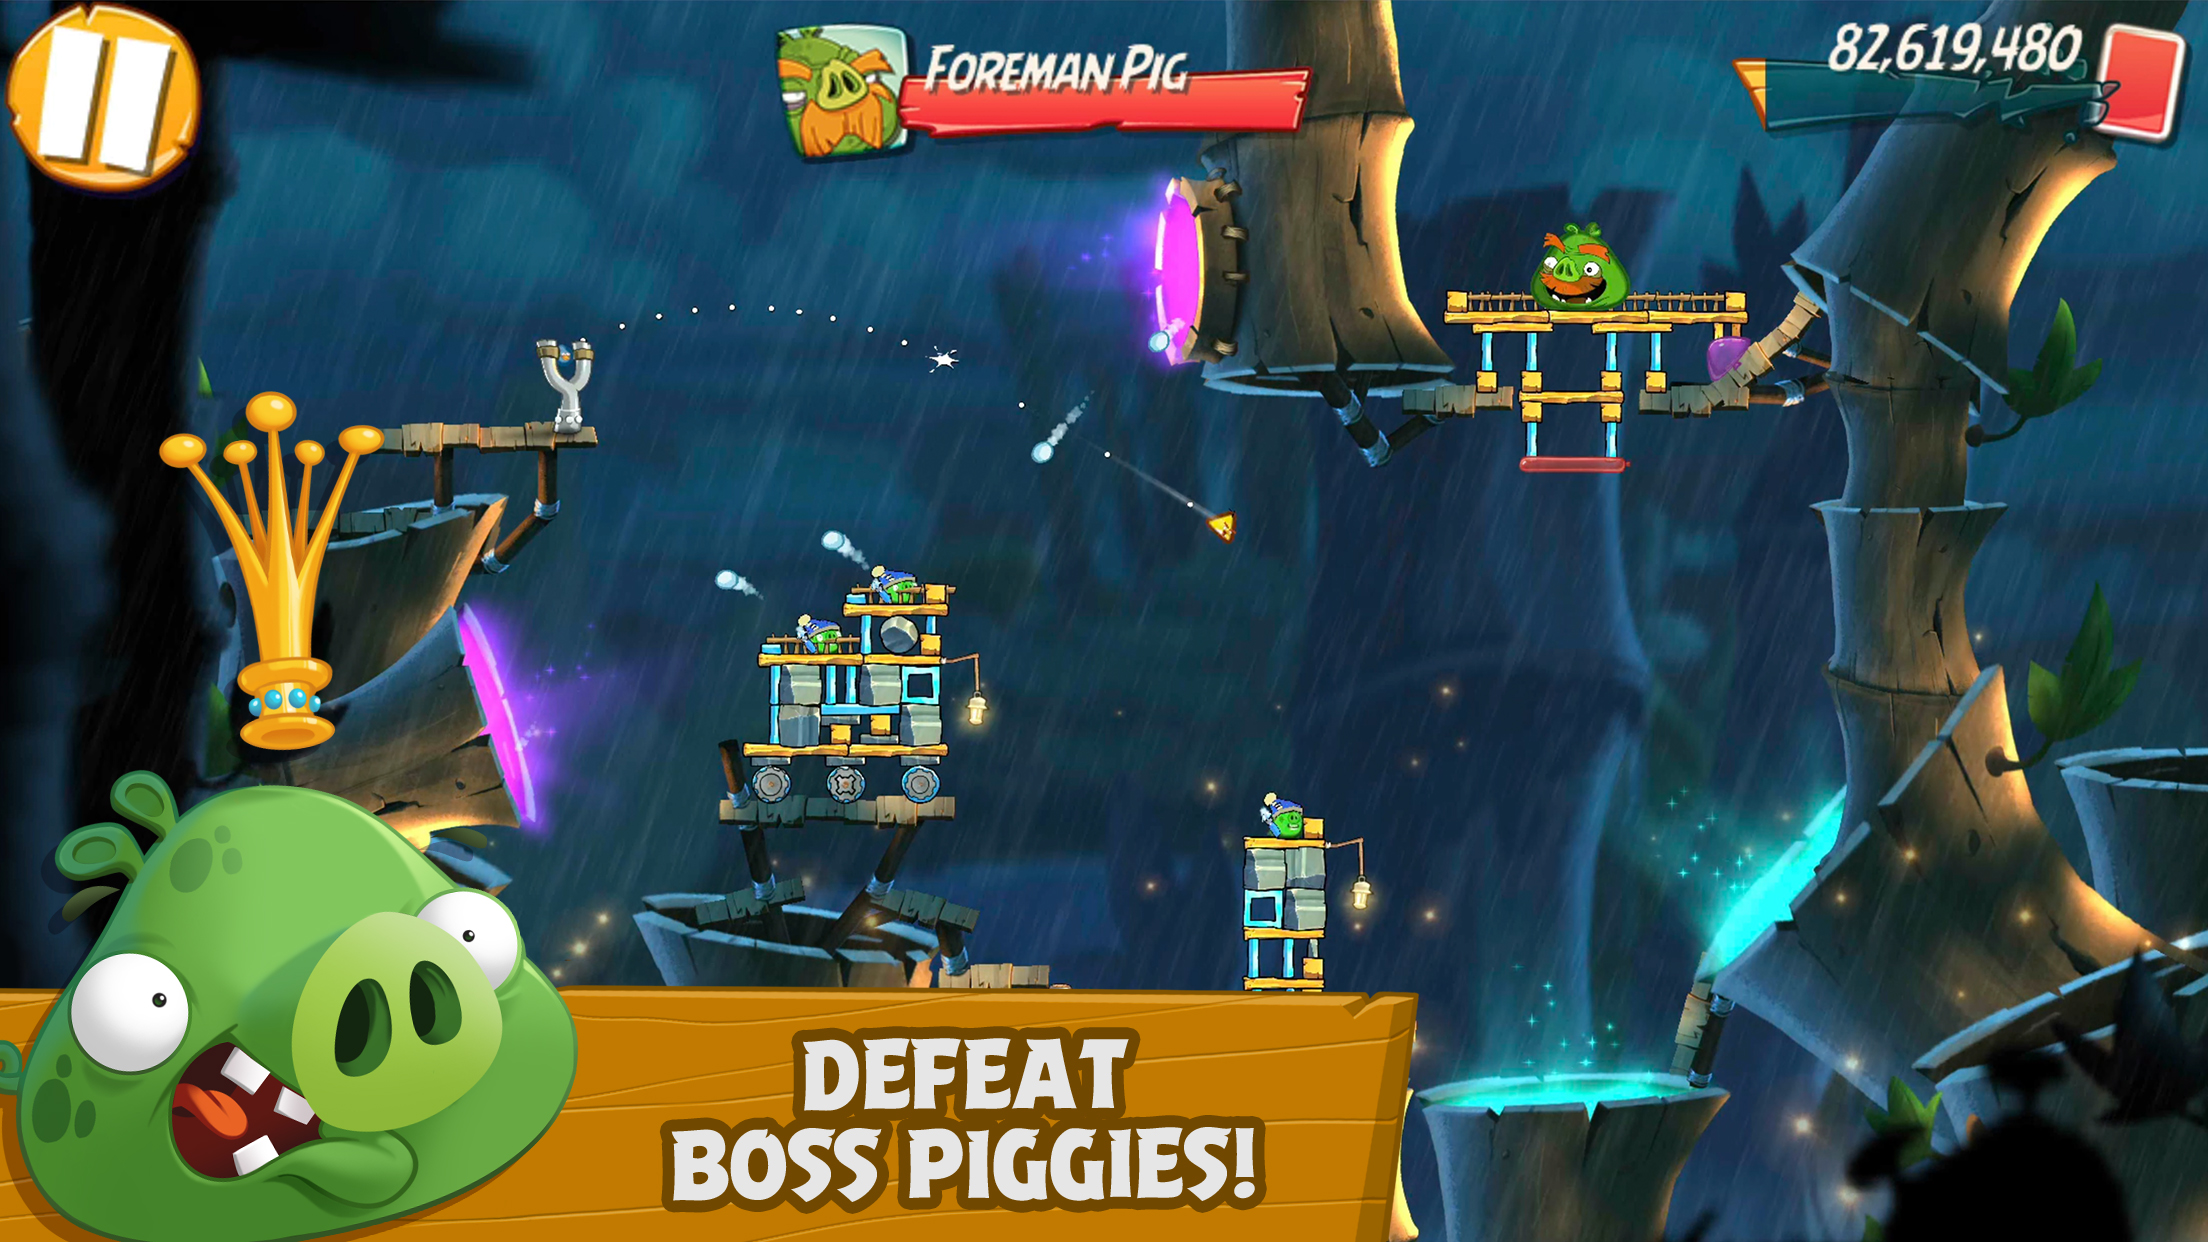 Download Angry Birds 2 on PC with NoxPlayer - Appcenter